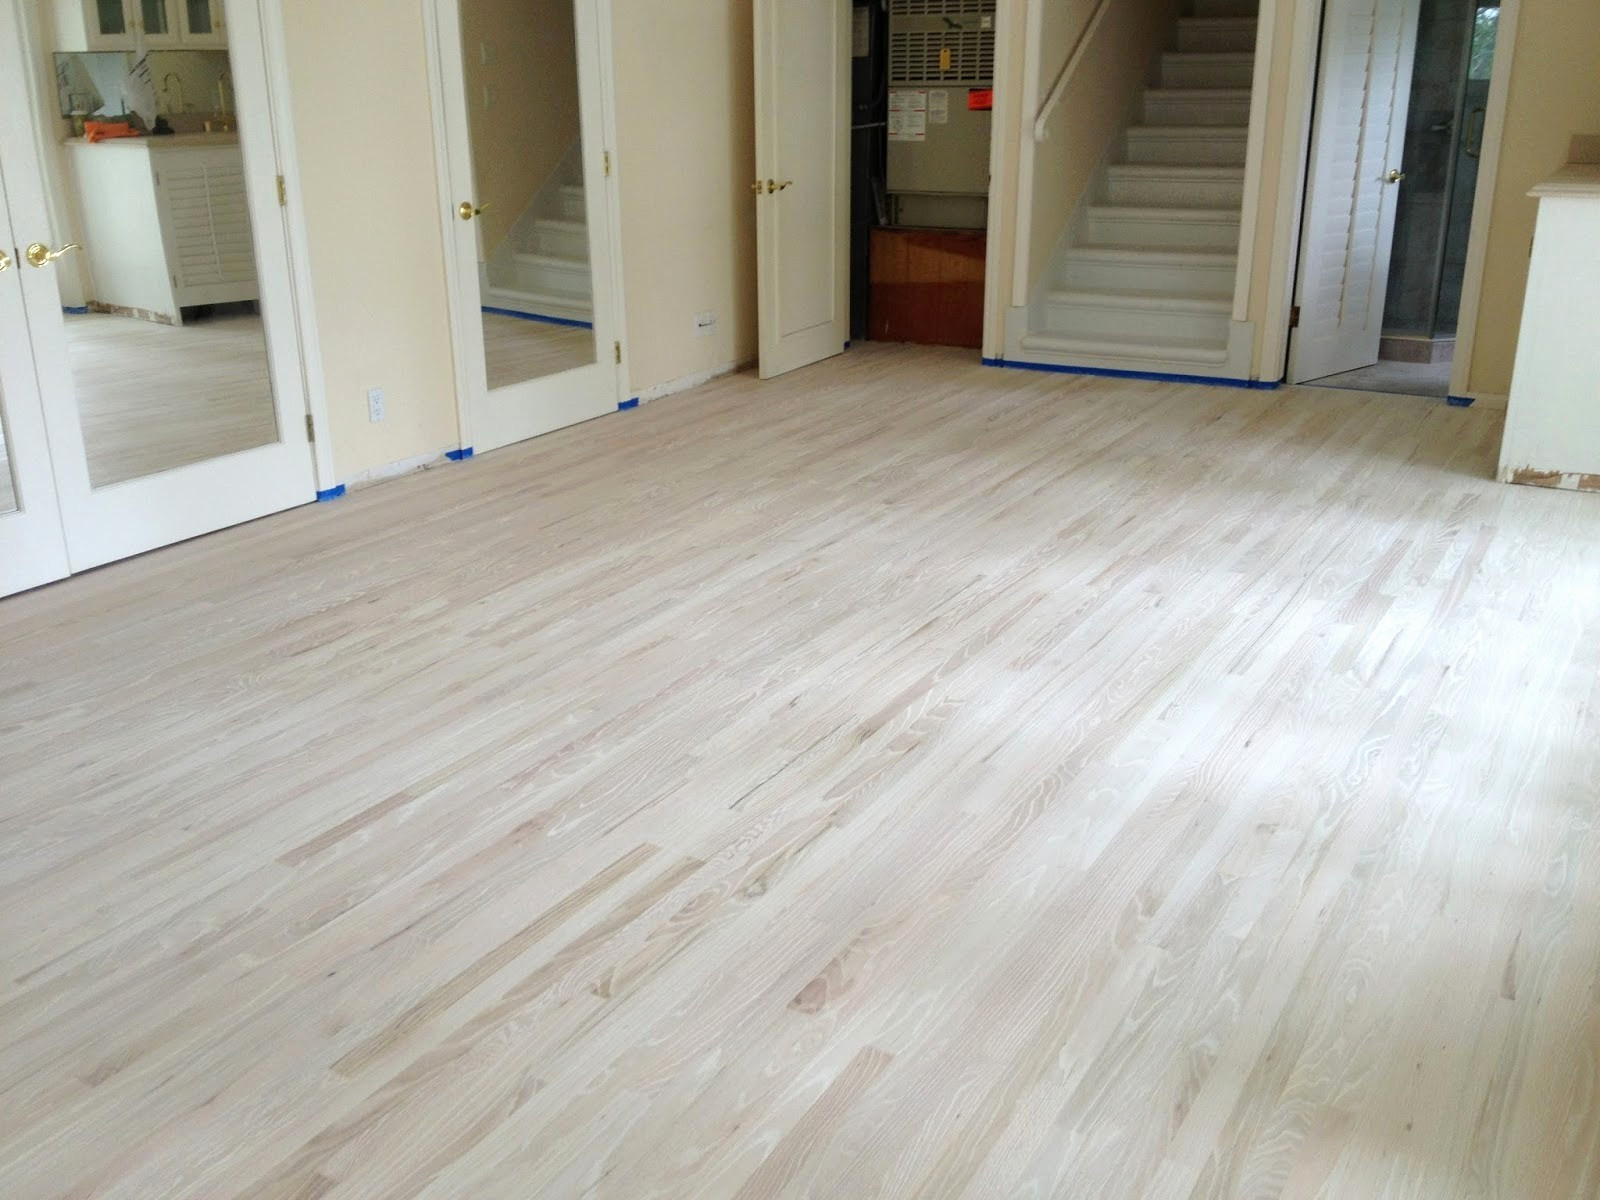 10 Lovely Cost To Refinish And Stain Hardwood Floors Unique